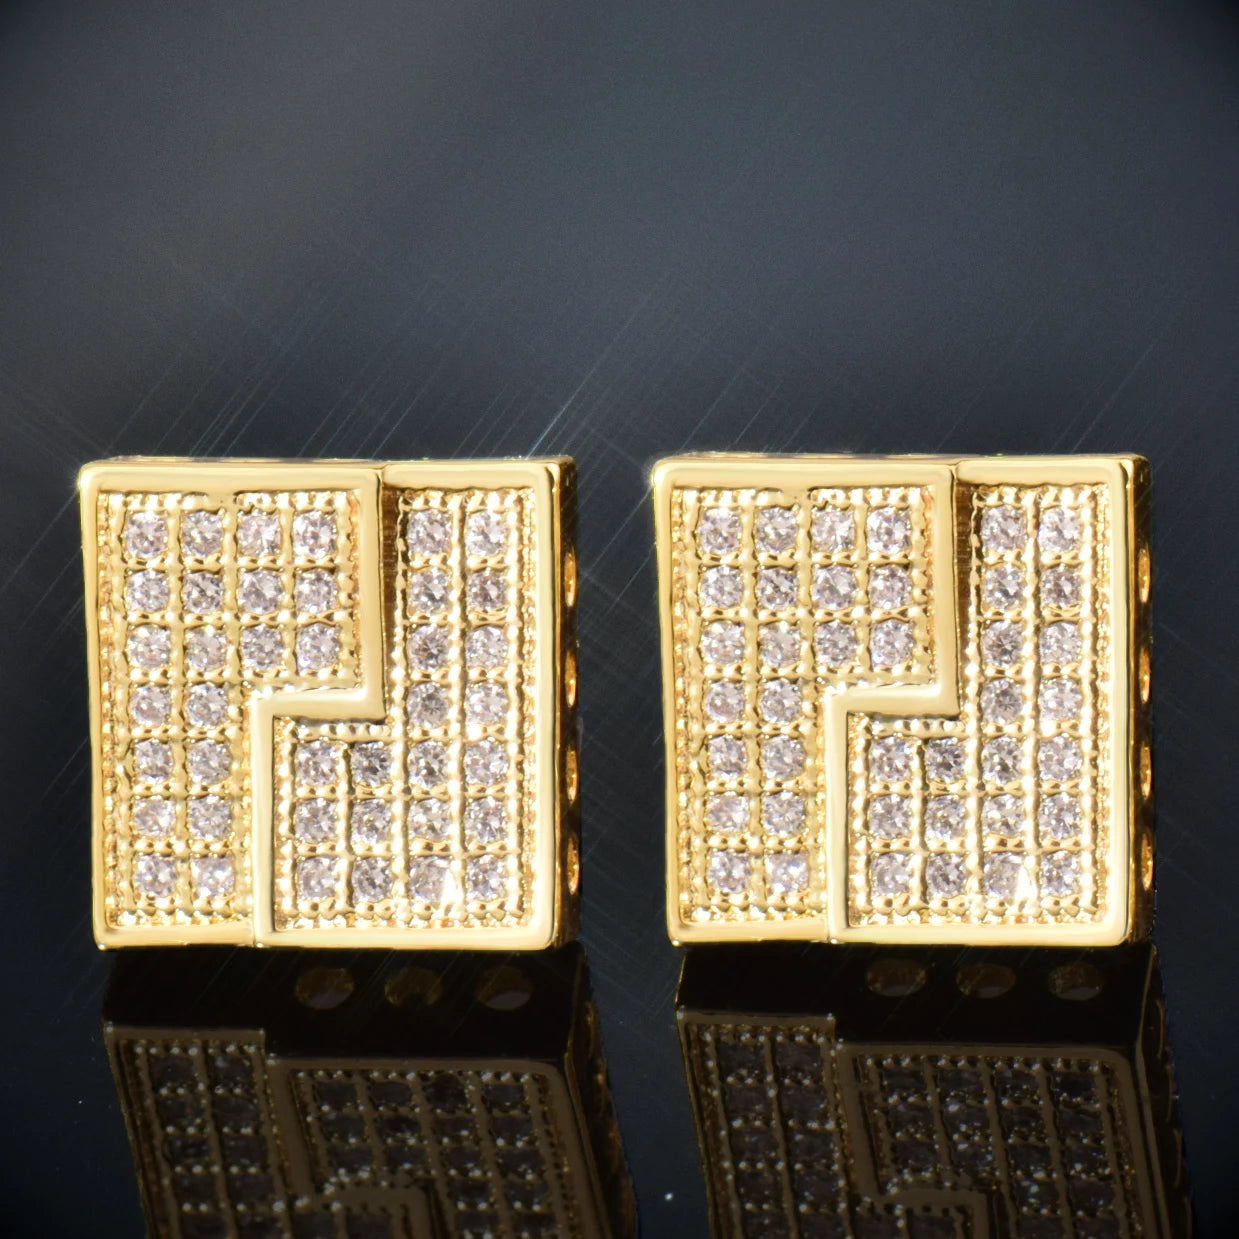 10mm Monogram Square Cut Earrings - Different Drips